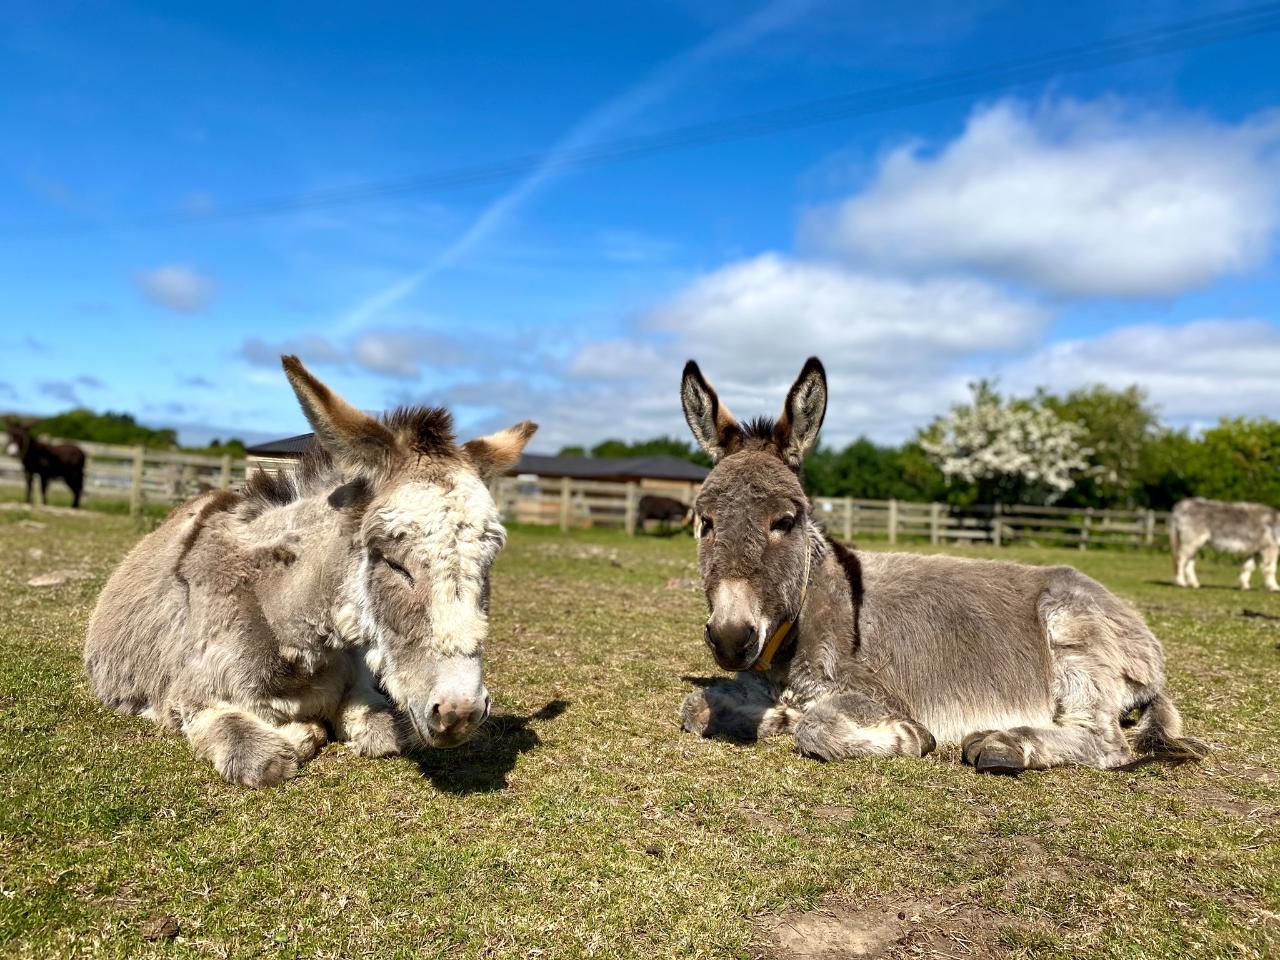 Isle of Wight - Busy Bees & Donkeys! - Tue 12th Oct 2021